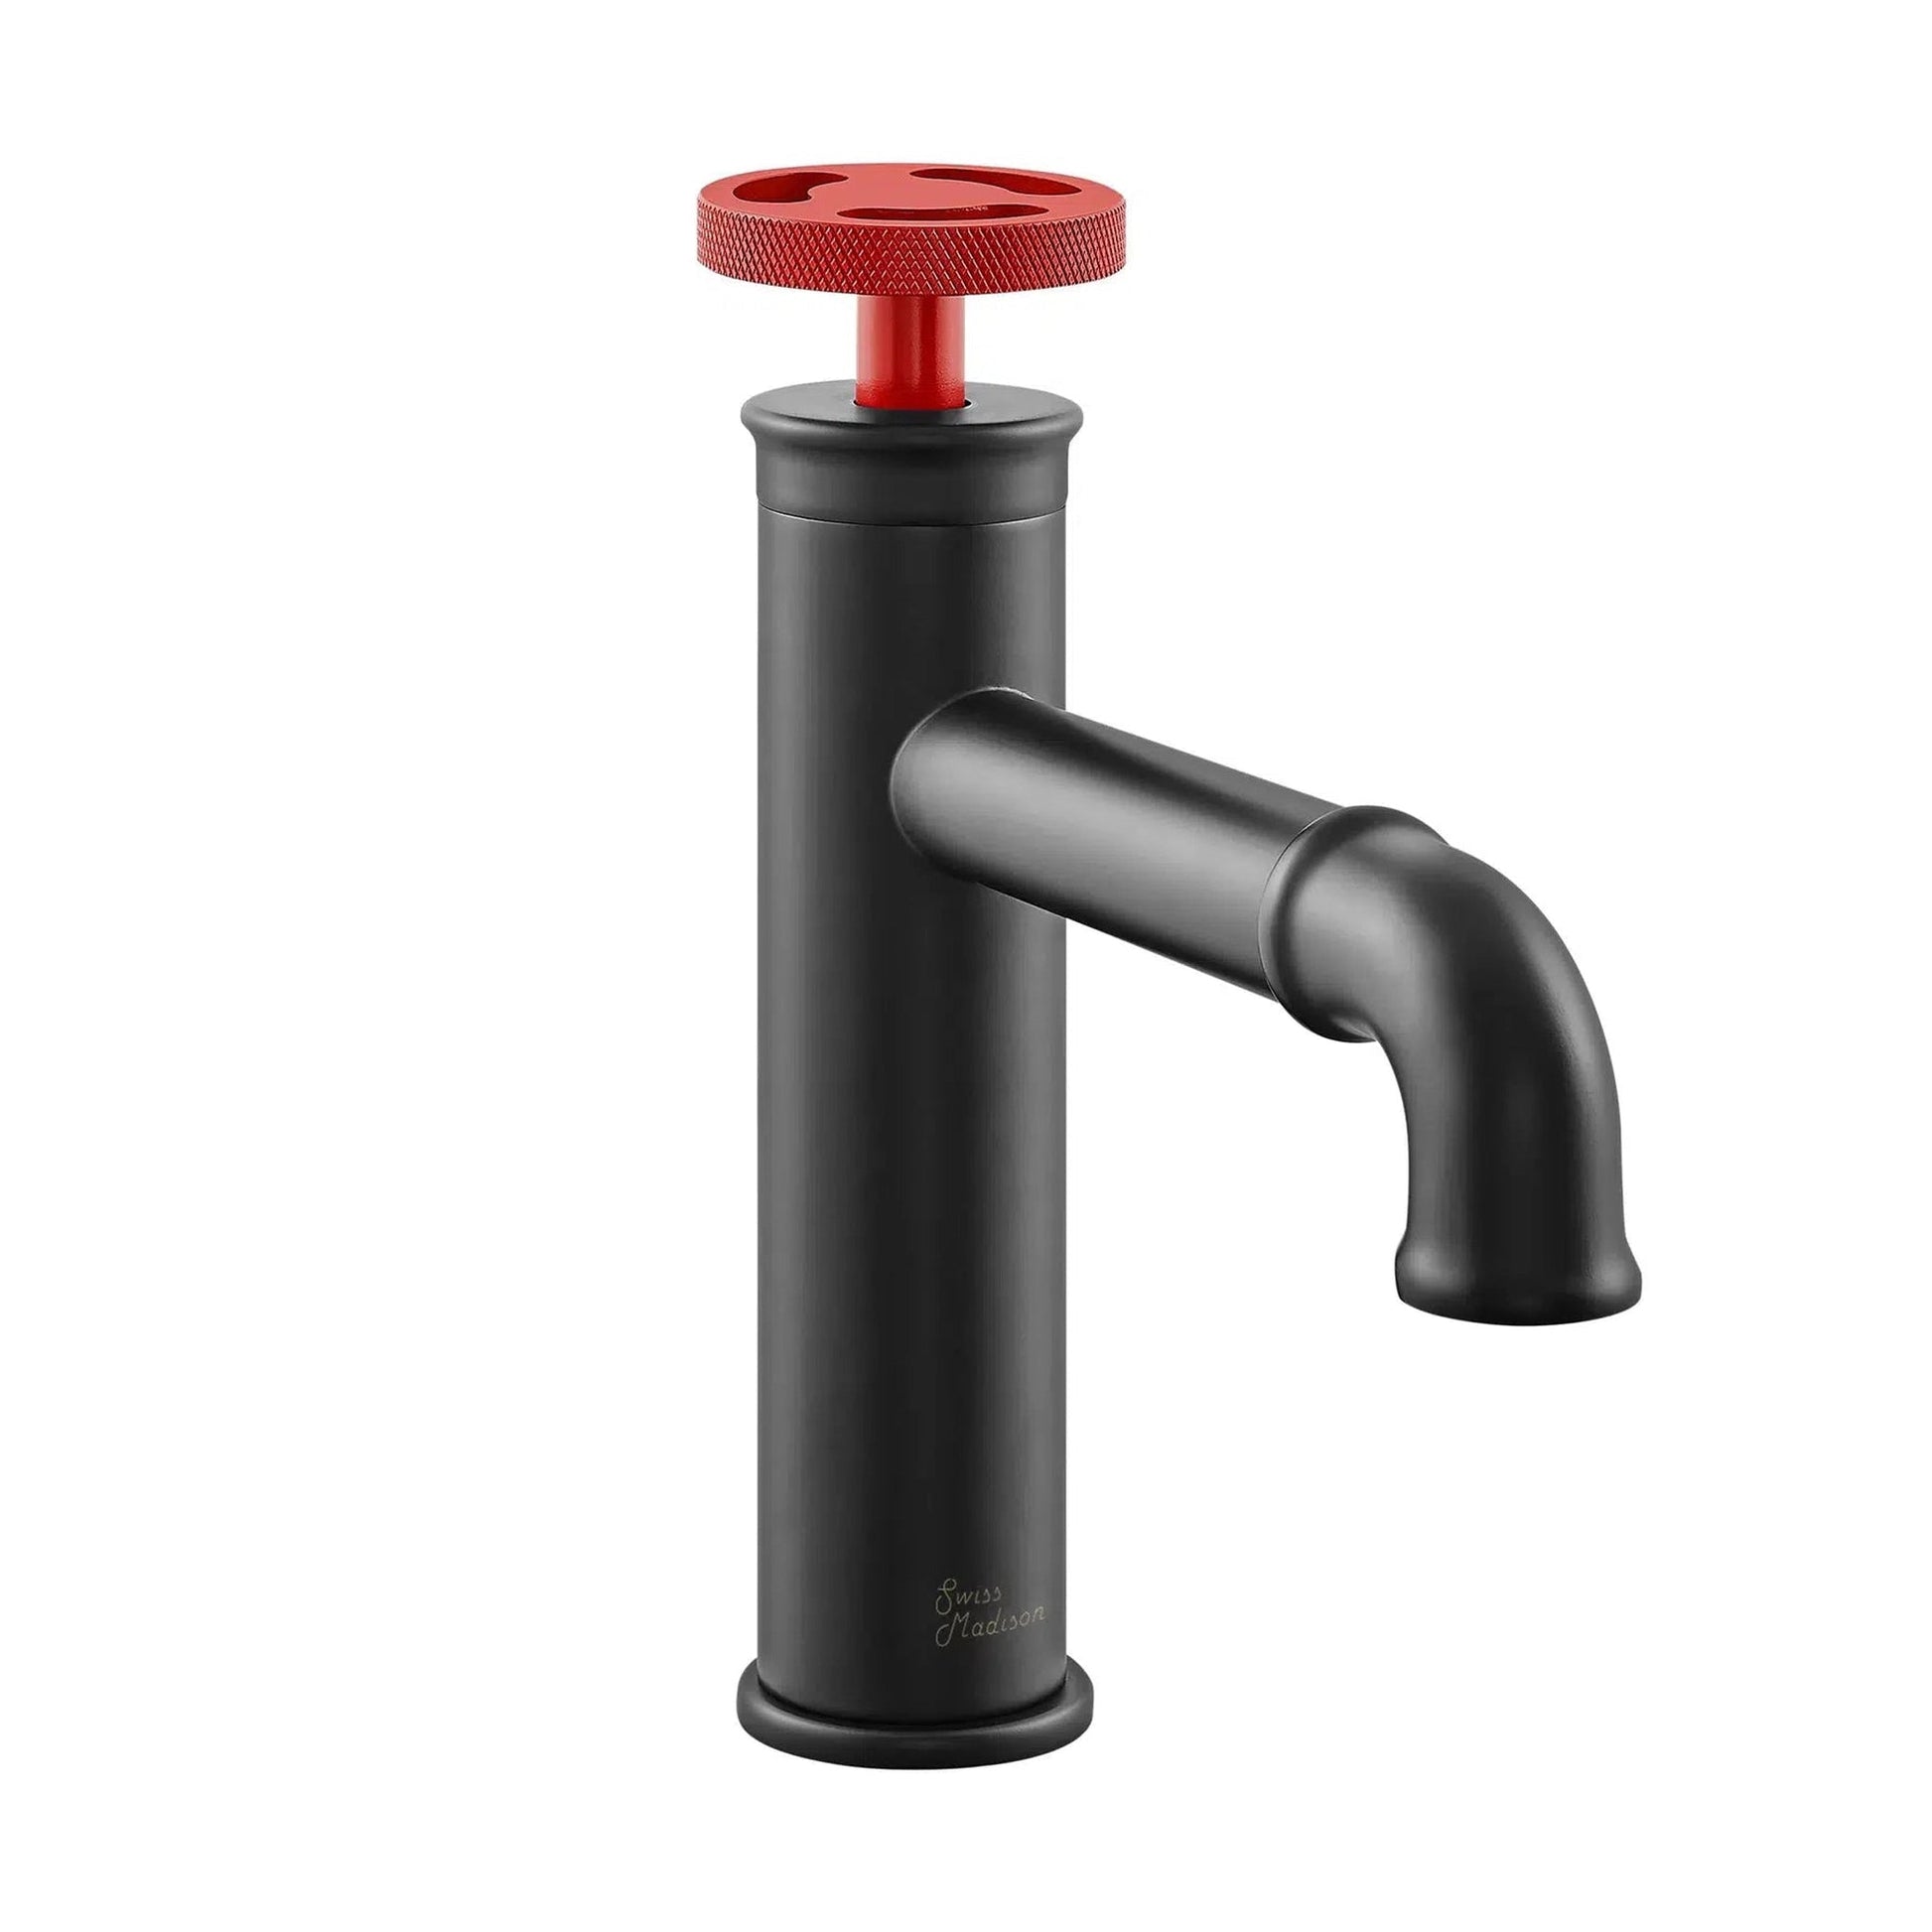 Swiss Madison Avallon 7" Single Red Handle Matte Black Bathroom Faucet With 1.2 GPM Flow Rate